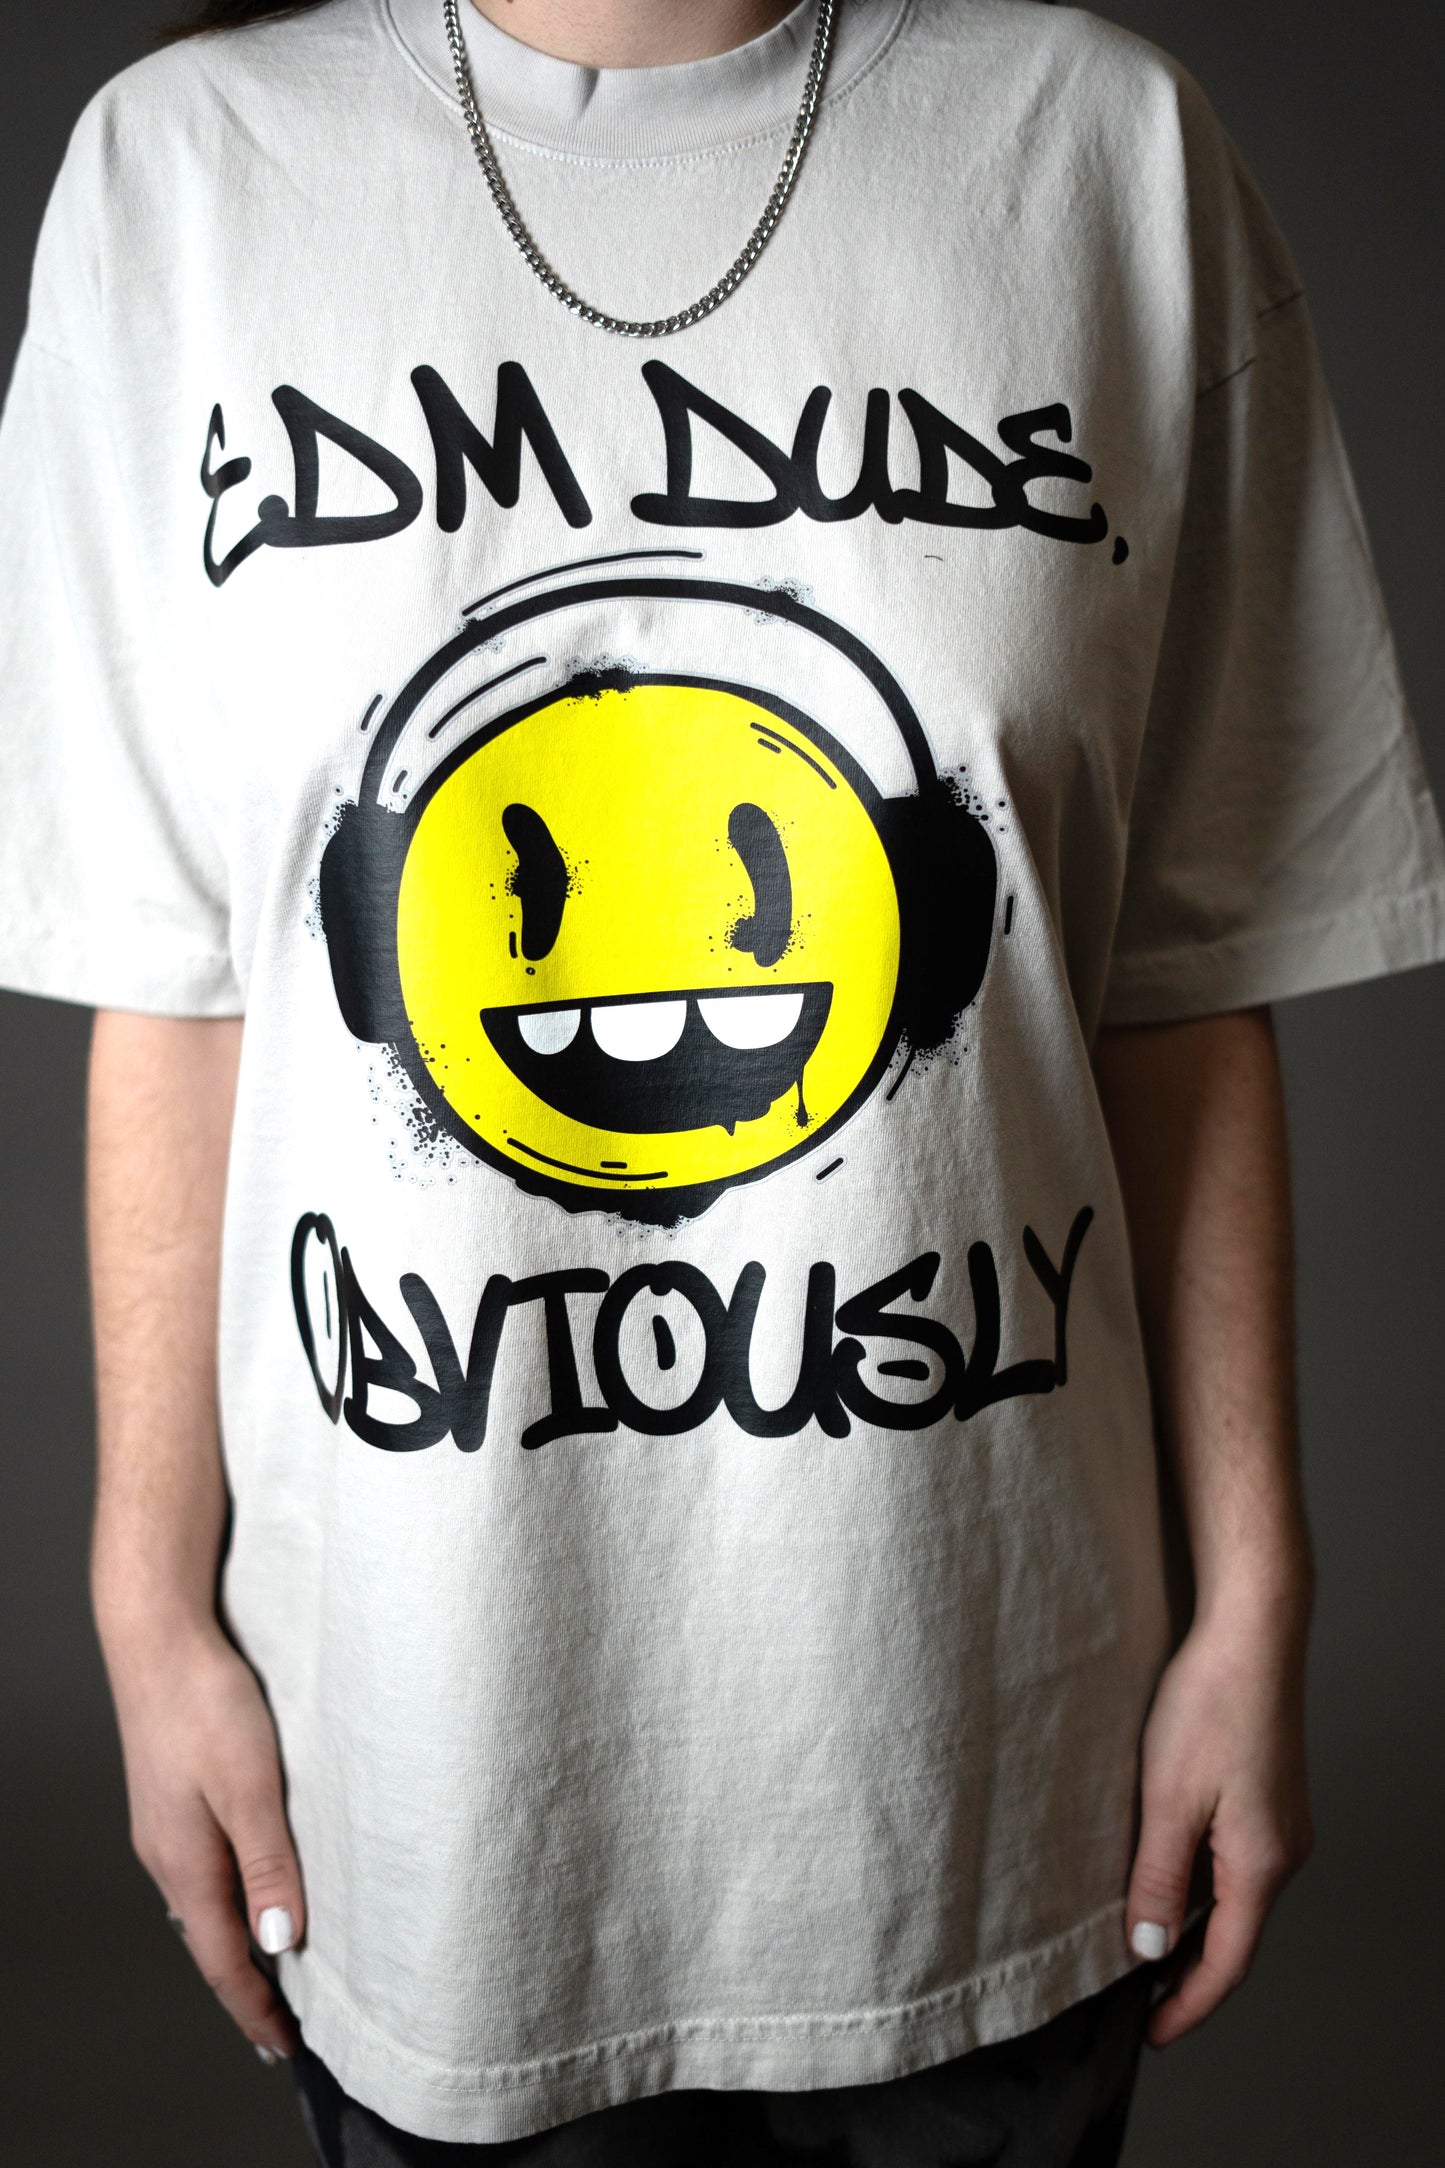 EDM Dude, Obviously